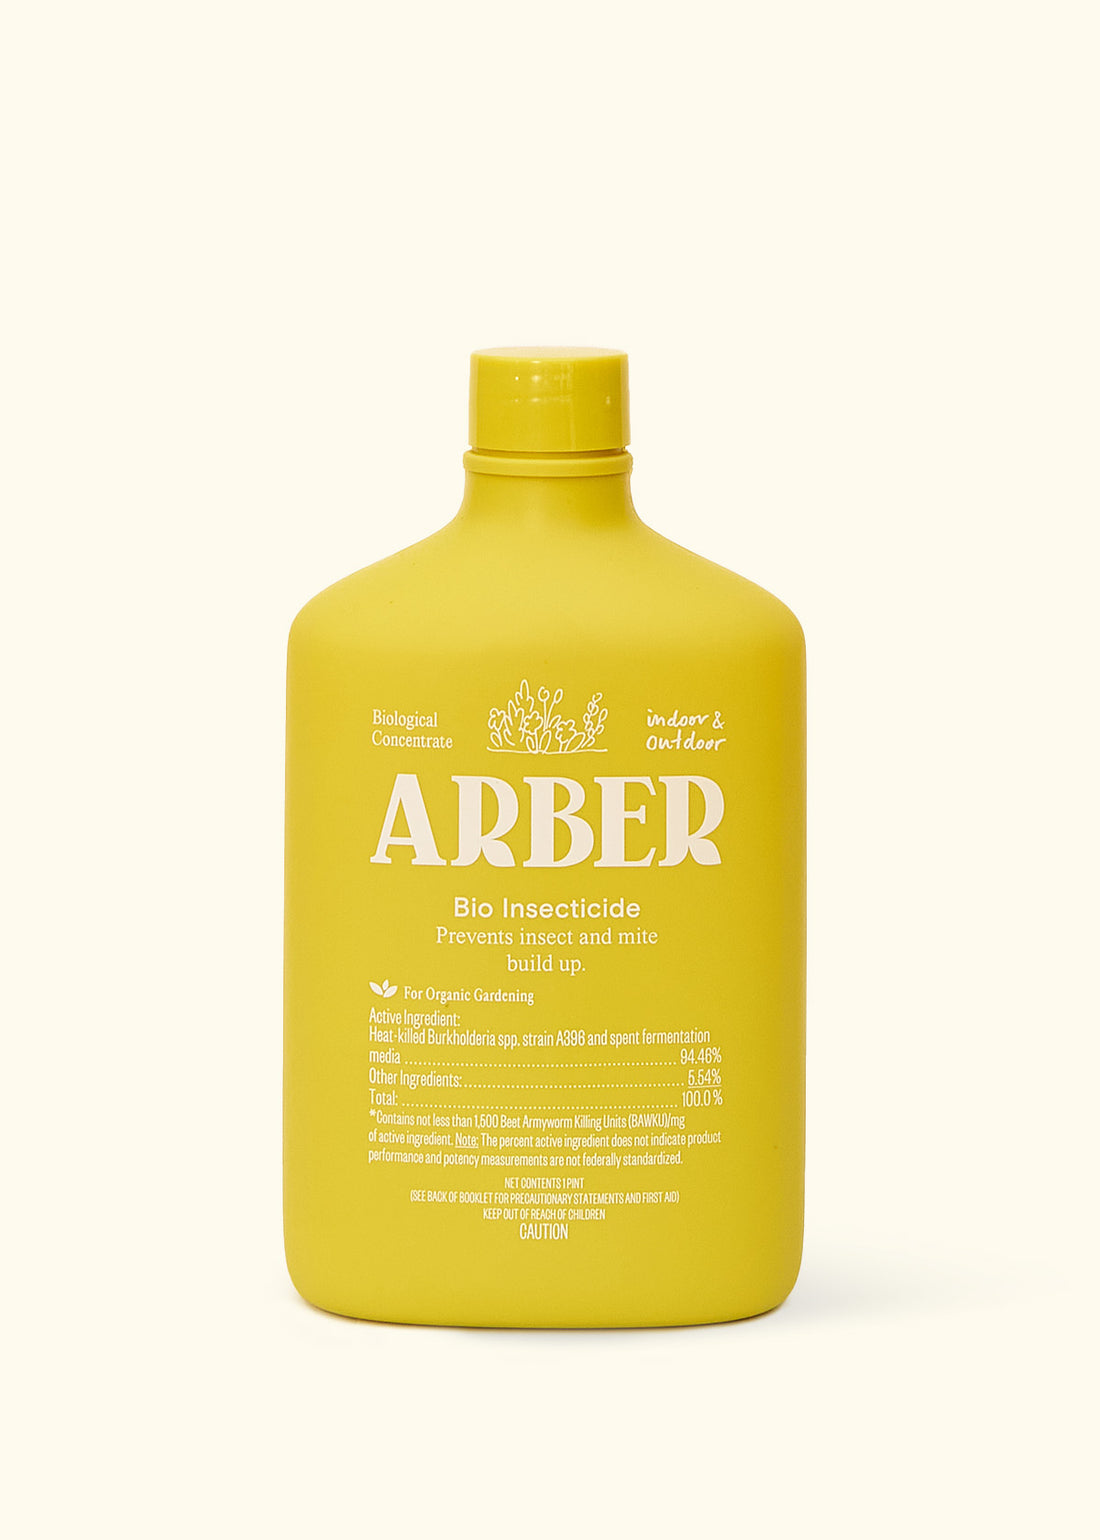 Arber Bio Insecticide - Hive Plants - Insecticide